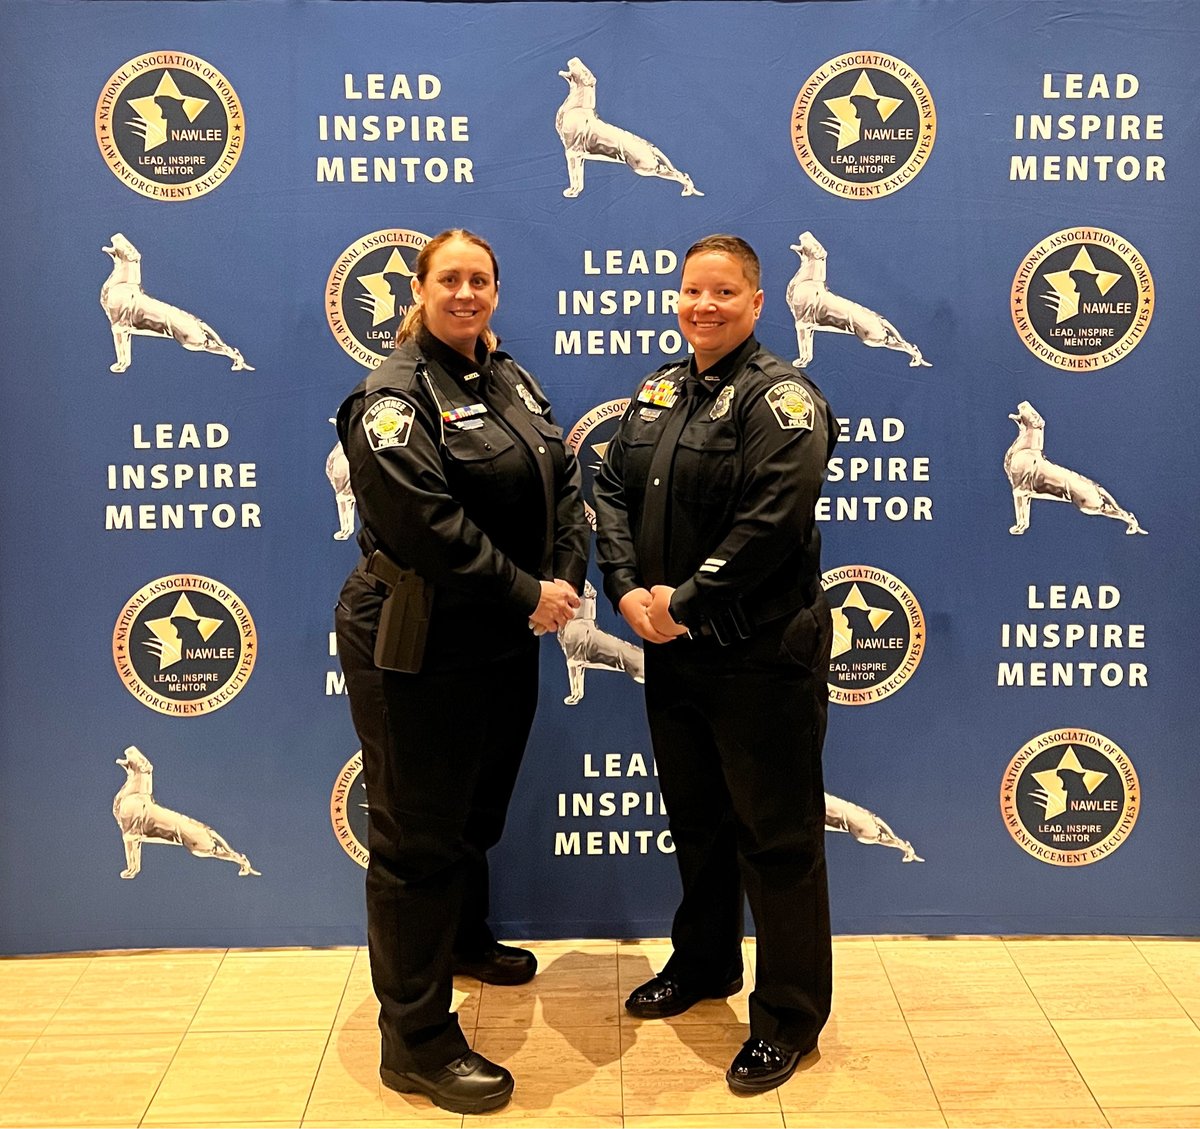 Detective Gonzales and Officer Durham recently participated in the National Association of Women Law Enforcement Executives Conference. The training they received focused on leadership development and mentorship opportunities for women in law enforcement.